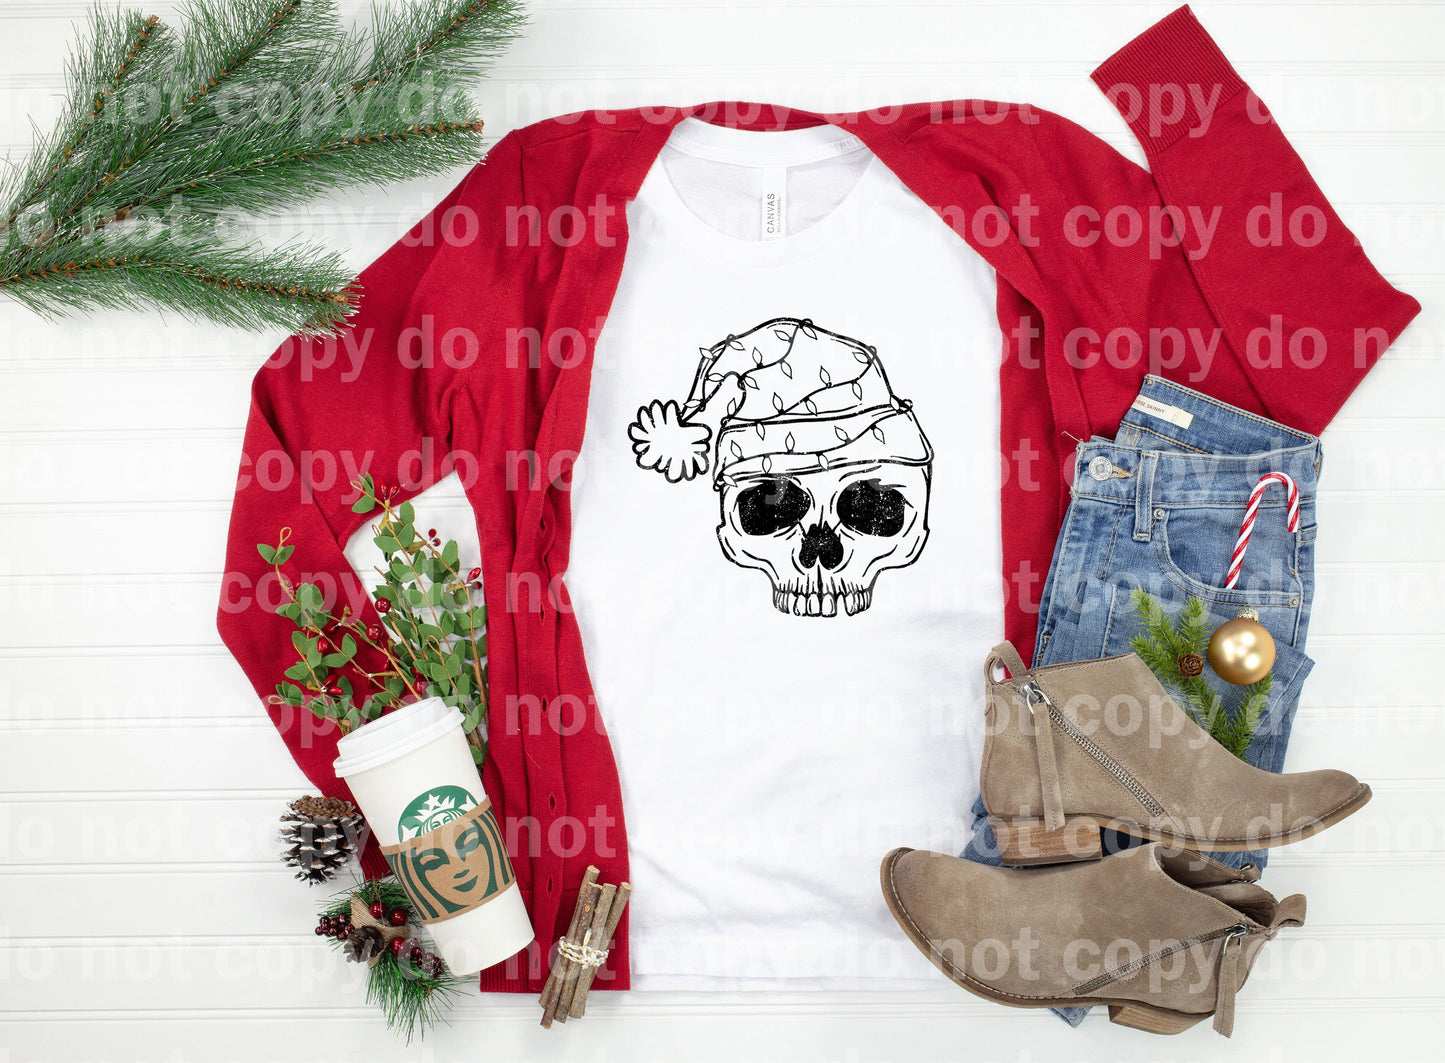 So Merry Lights Distressed Full Color/One Color Dream Print or Sublimation Print